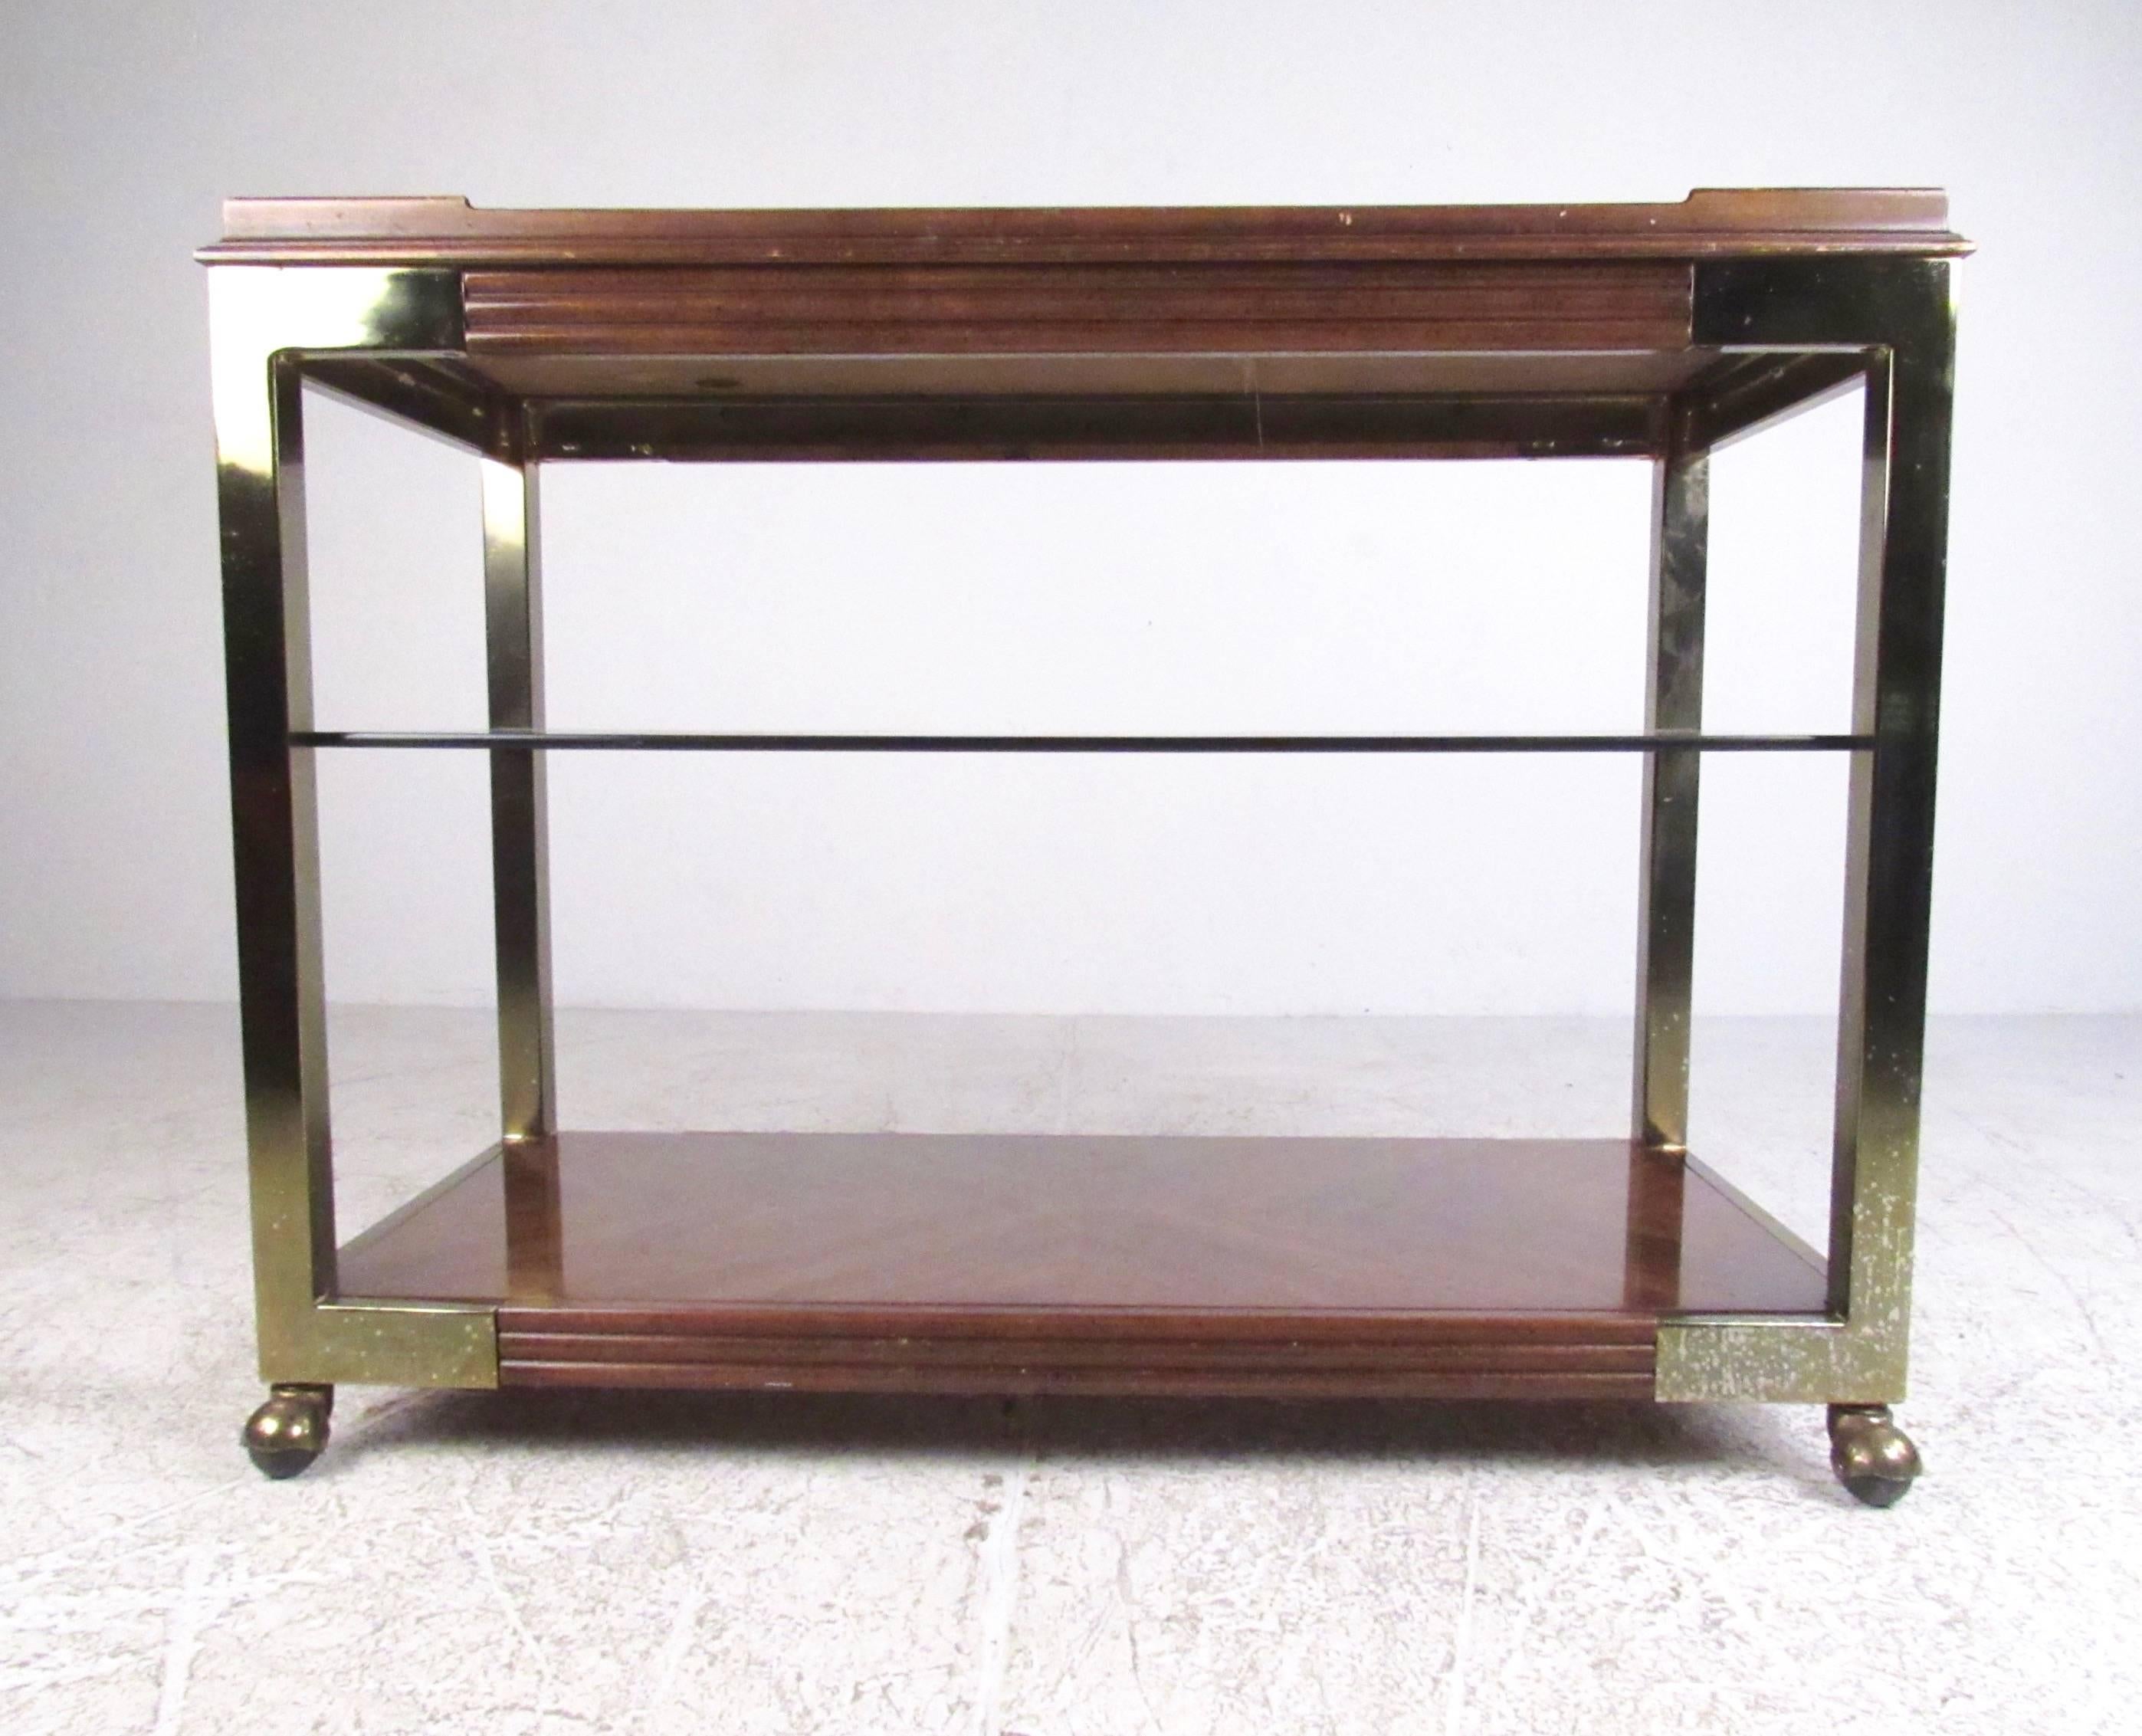 This unique vintage modern service cart features two-tier design allowing for plenty of liquor and glassware storage for home or office. Dark wood finish with brass frame nicely compliments the bronze mirrored top finish and tinted glass shelf,